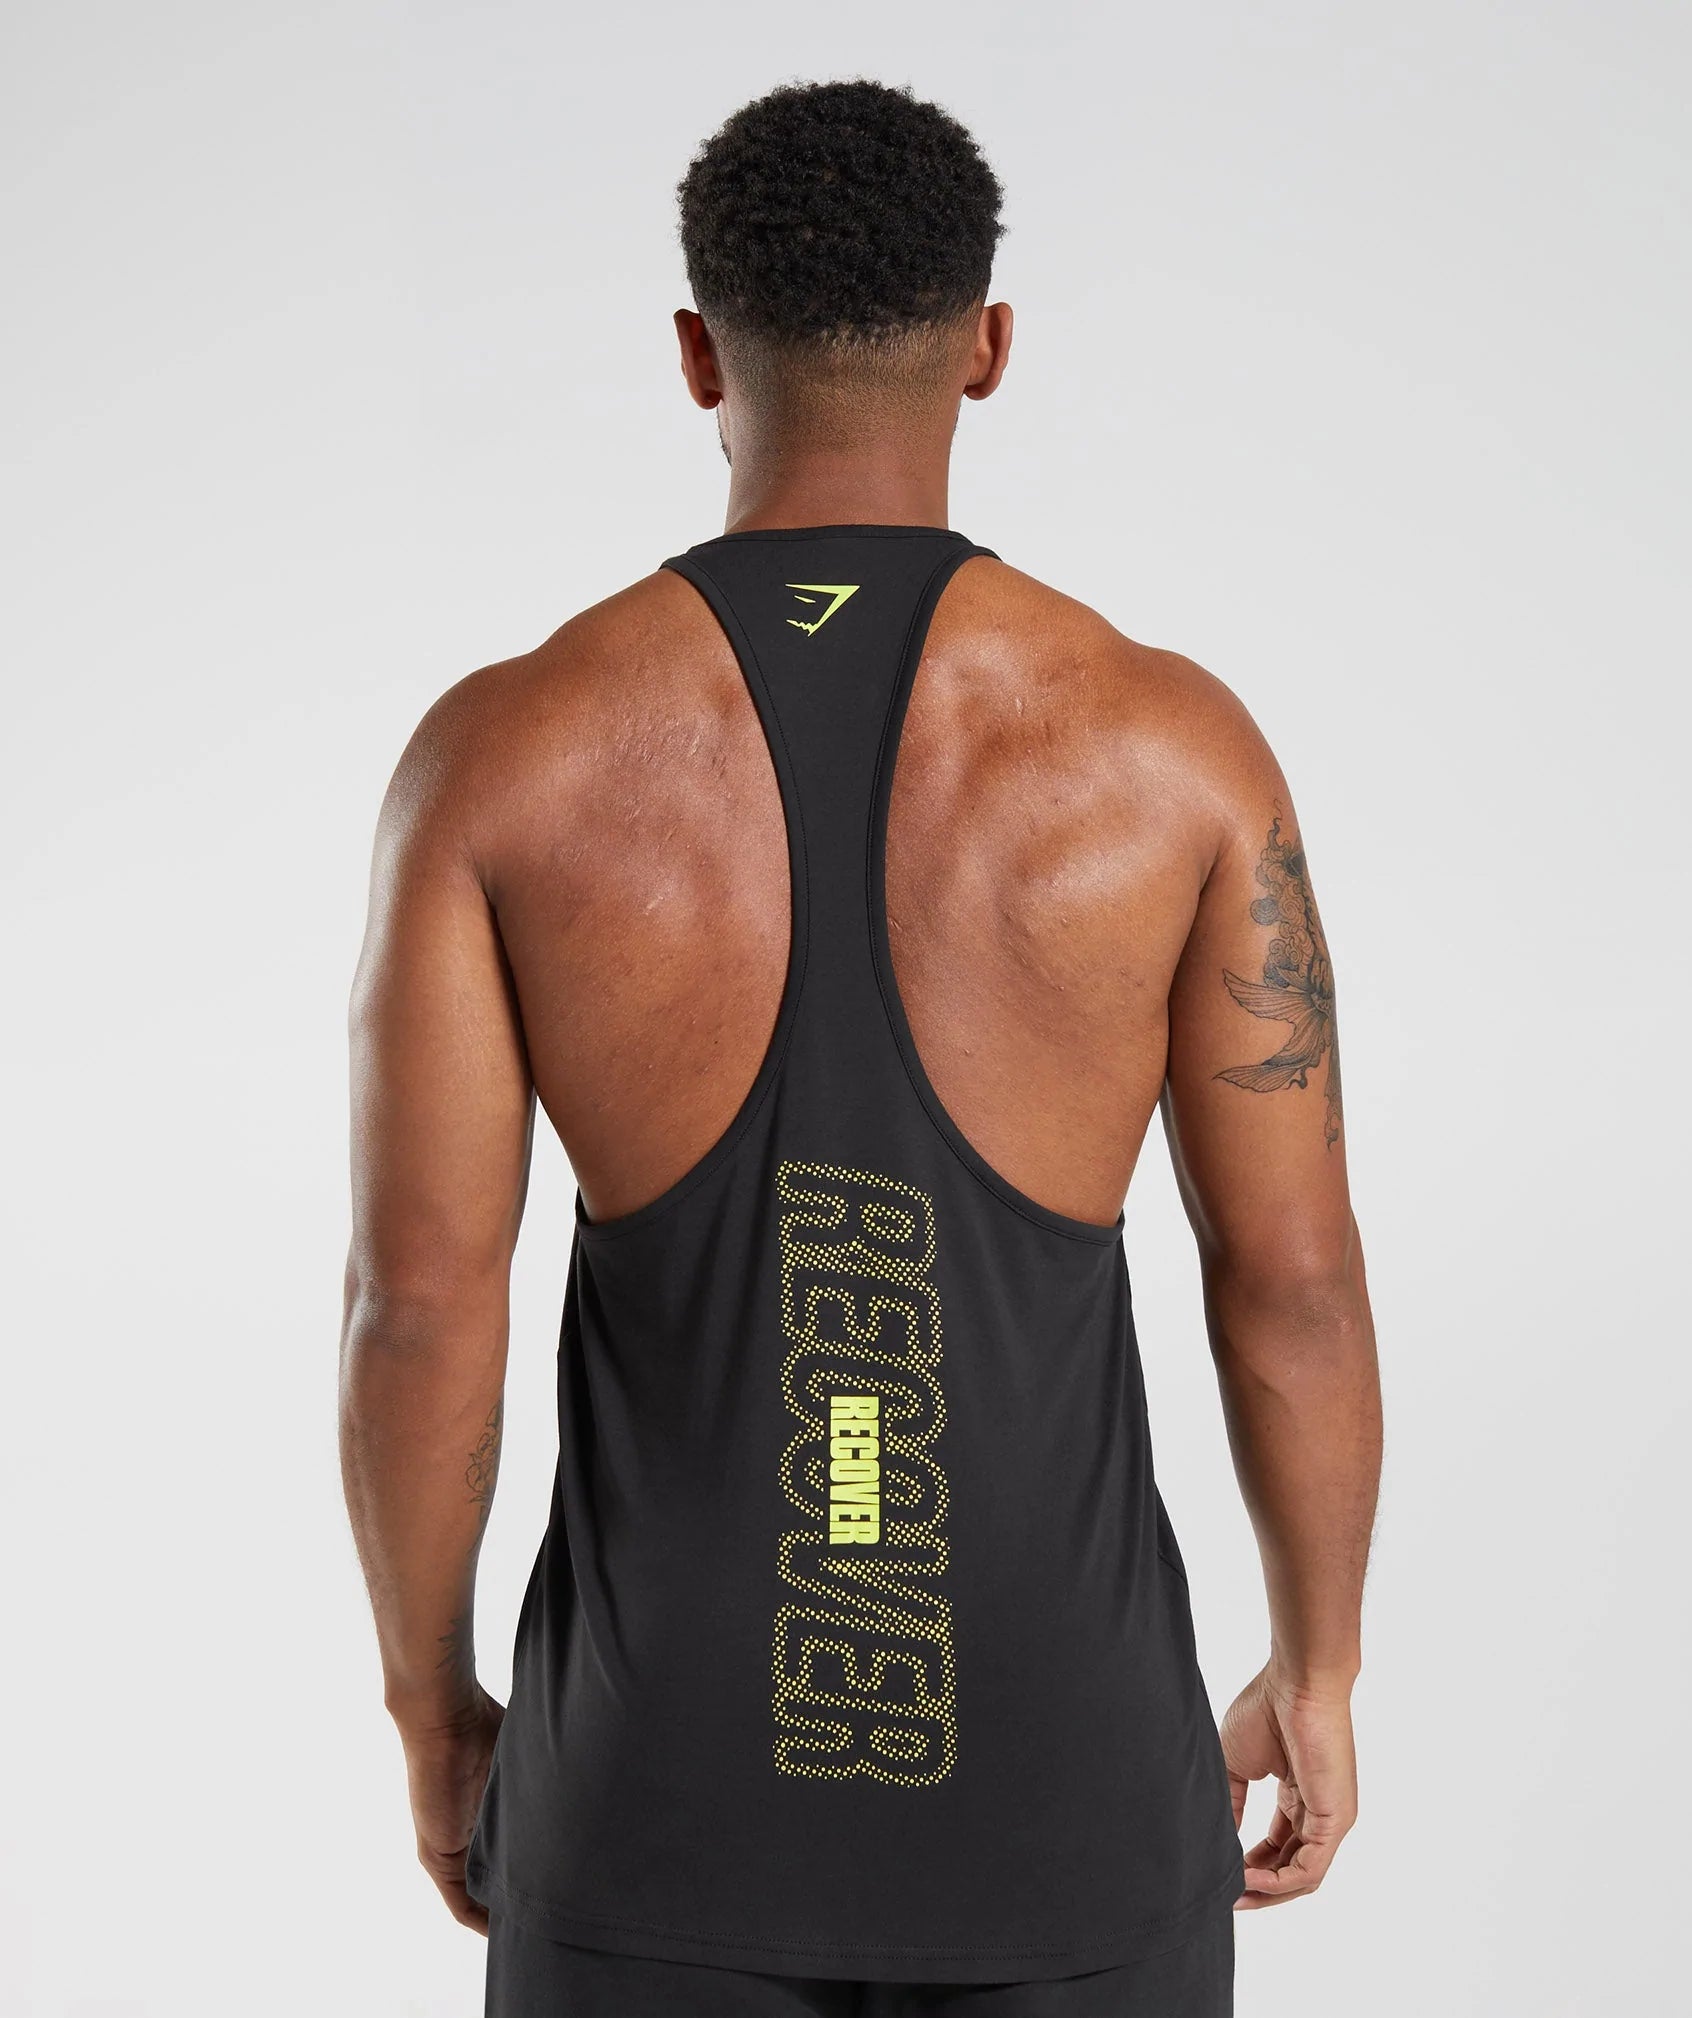 Recovery Graphic Stringer in Black - view 1